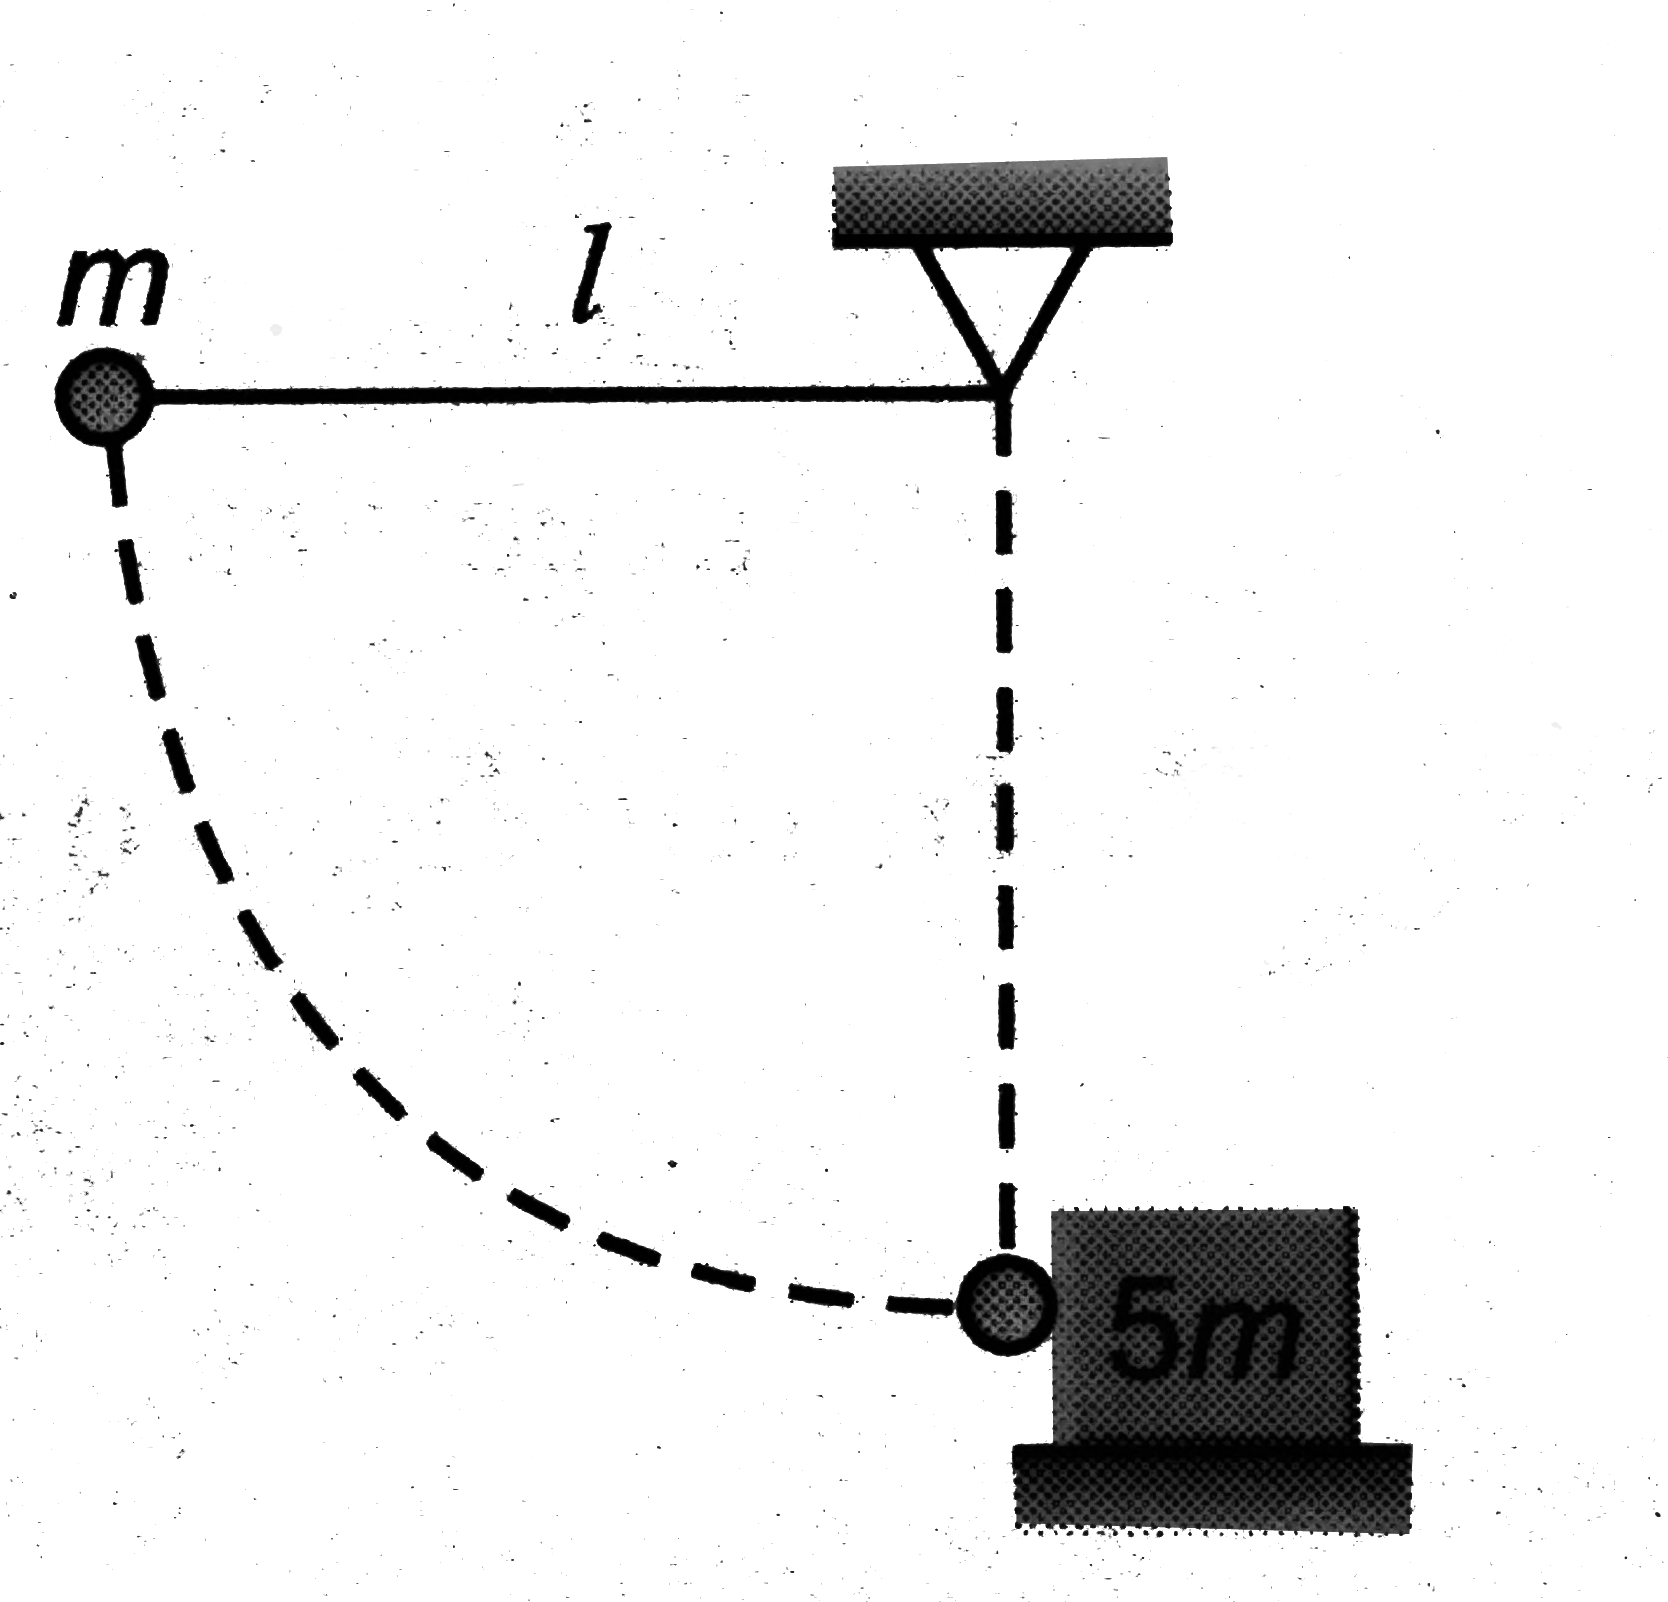 A pendulum bob of mass m connected to the end of material string of length l is released from rest from horizontal position as shown in the figure. At the lowest point the bob makes an elastic collision with a stationary block of mass 5m, which is kept on a frictionless surface. Choose out the correct statement(s) for the instant just after the impact.